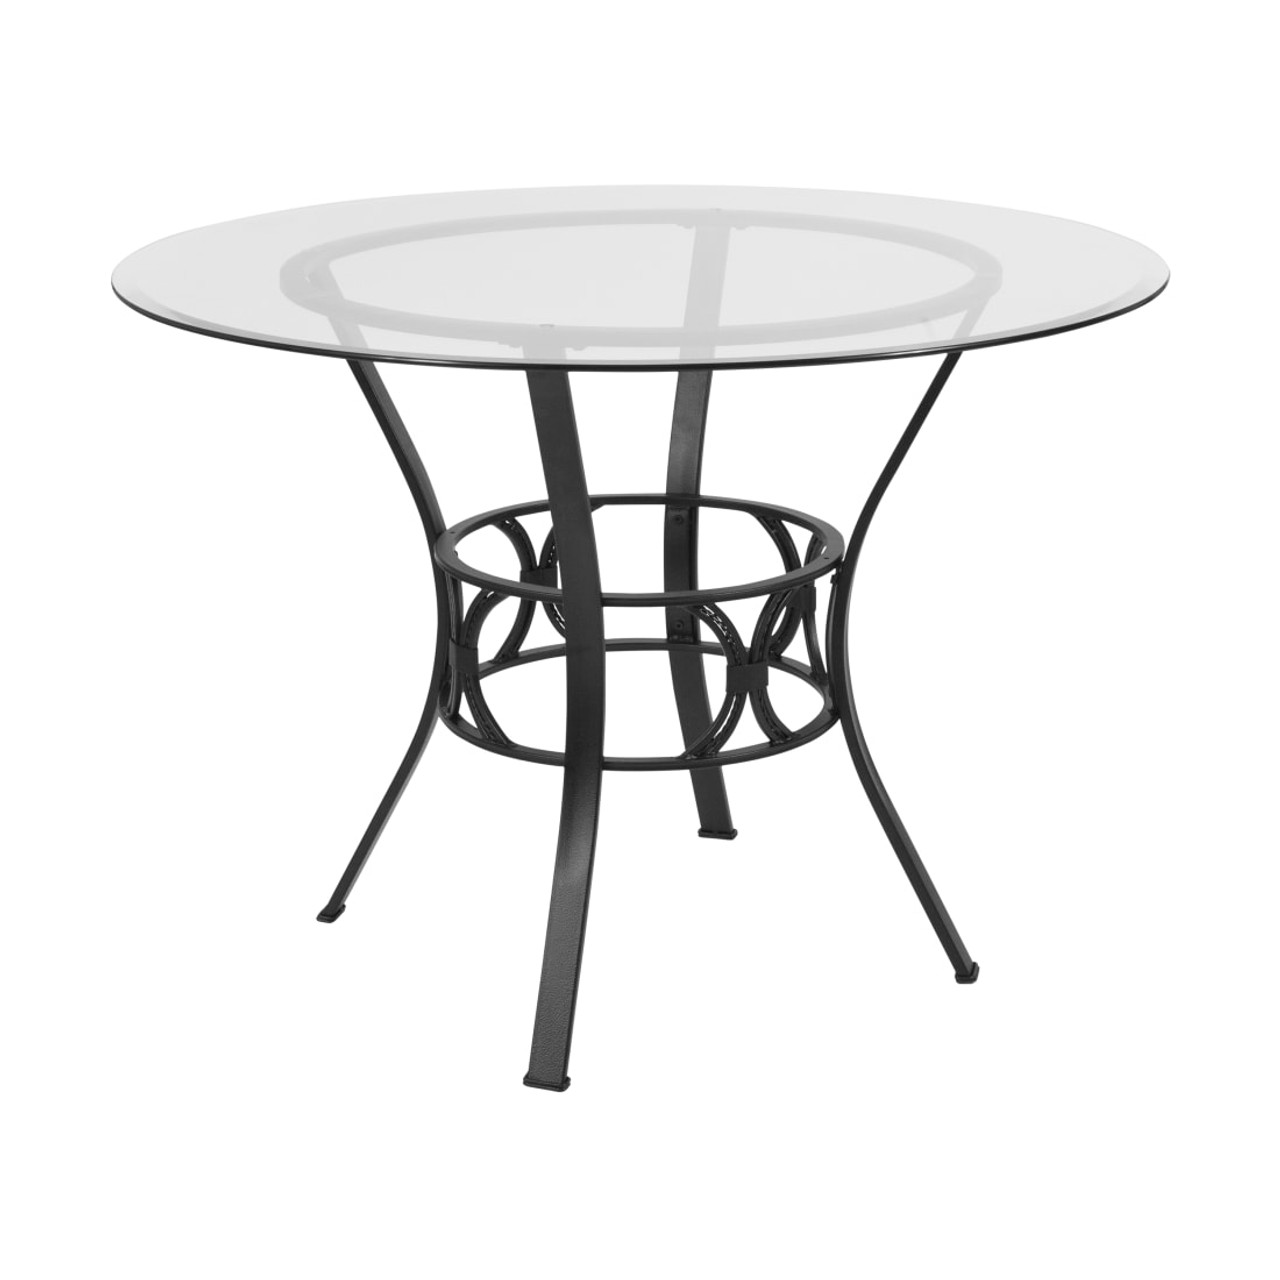 Carlisle 42” Round Glass Dining Table with Black Metal Frame